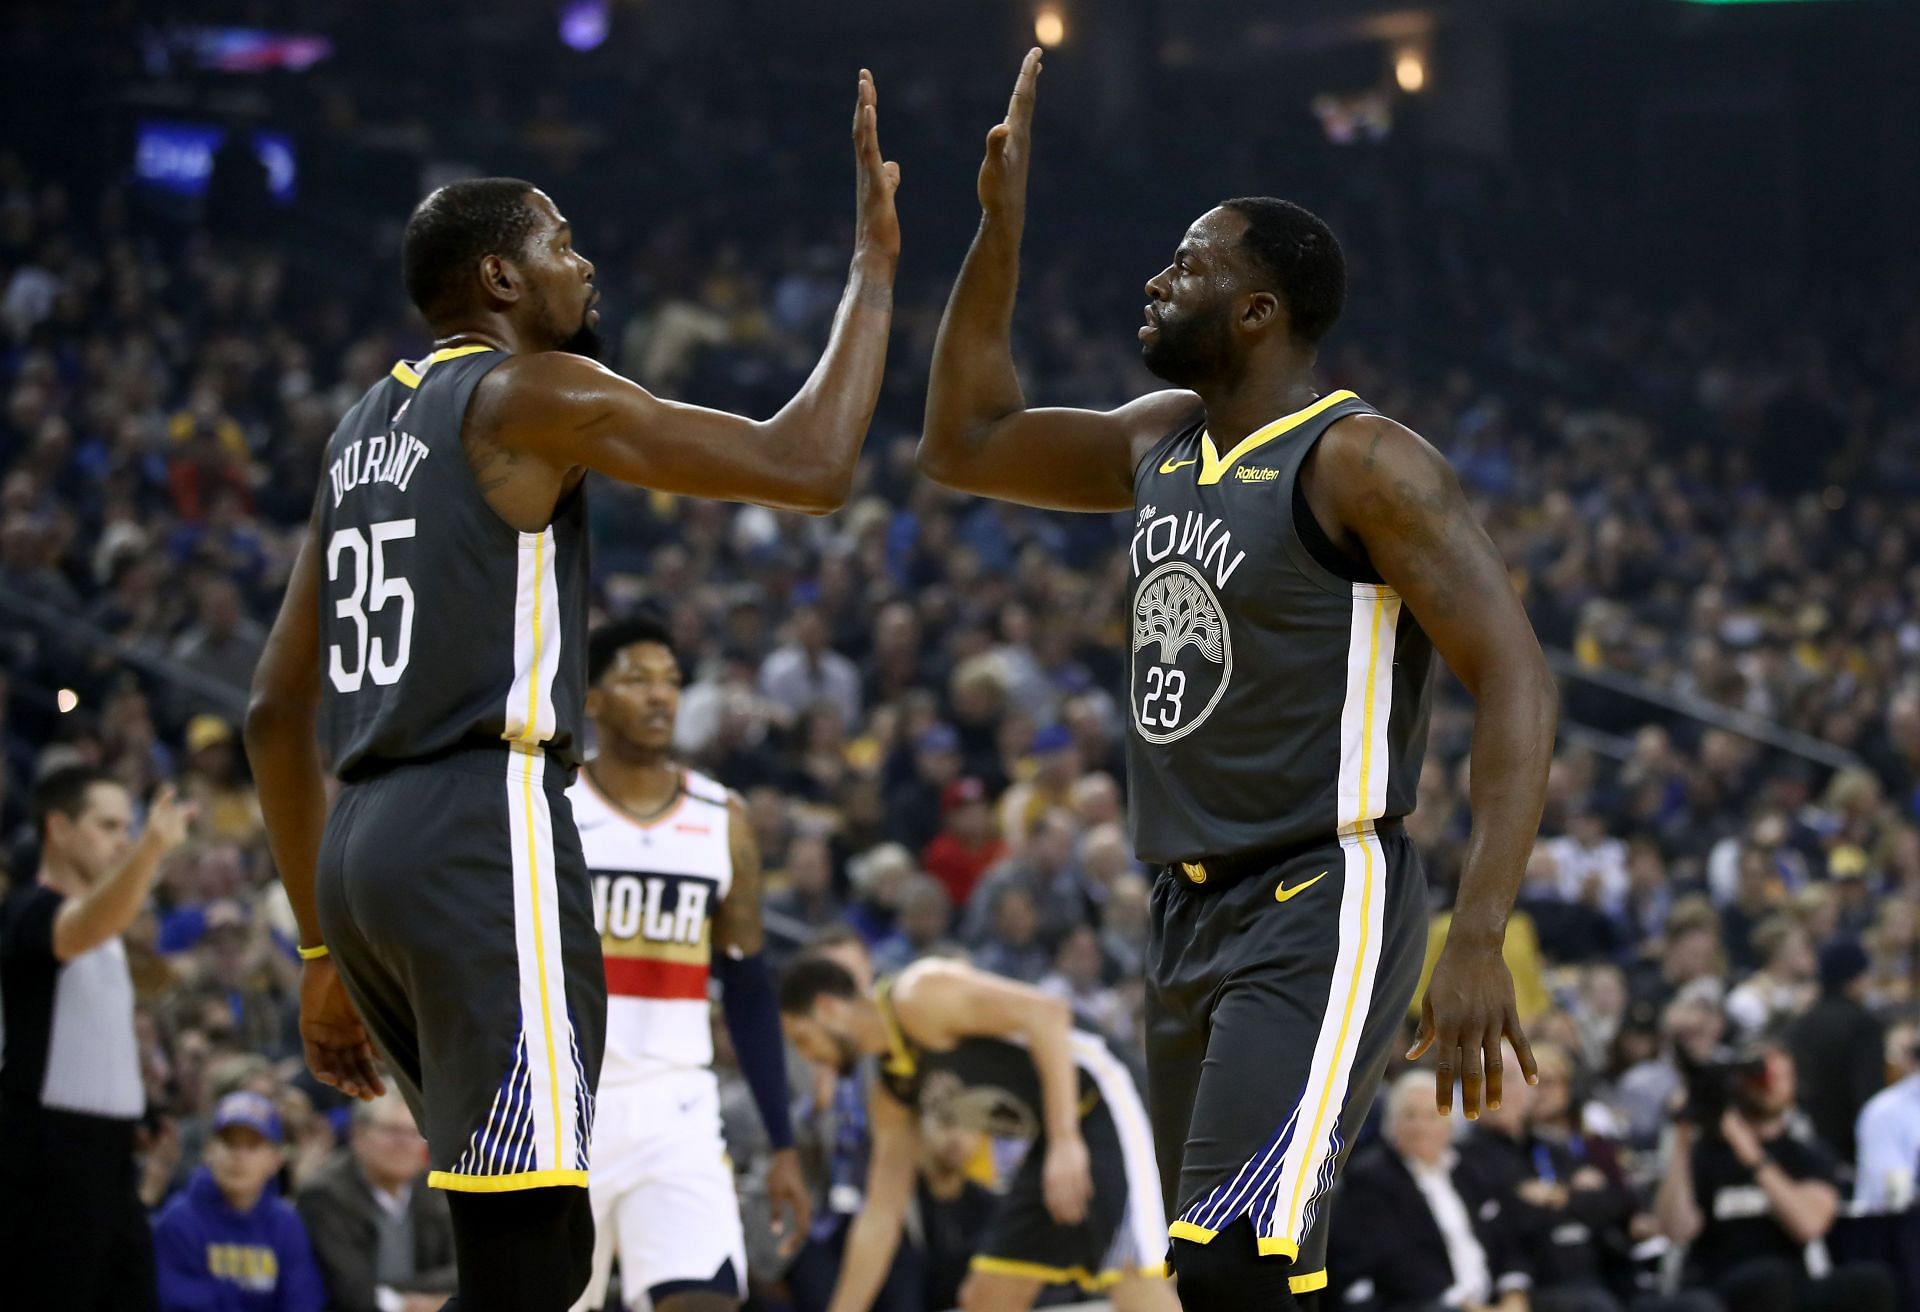 Draymond Green and Kevin Durant celebrate a play